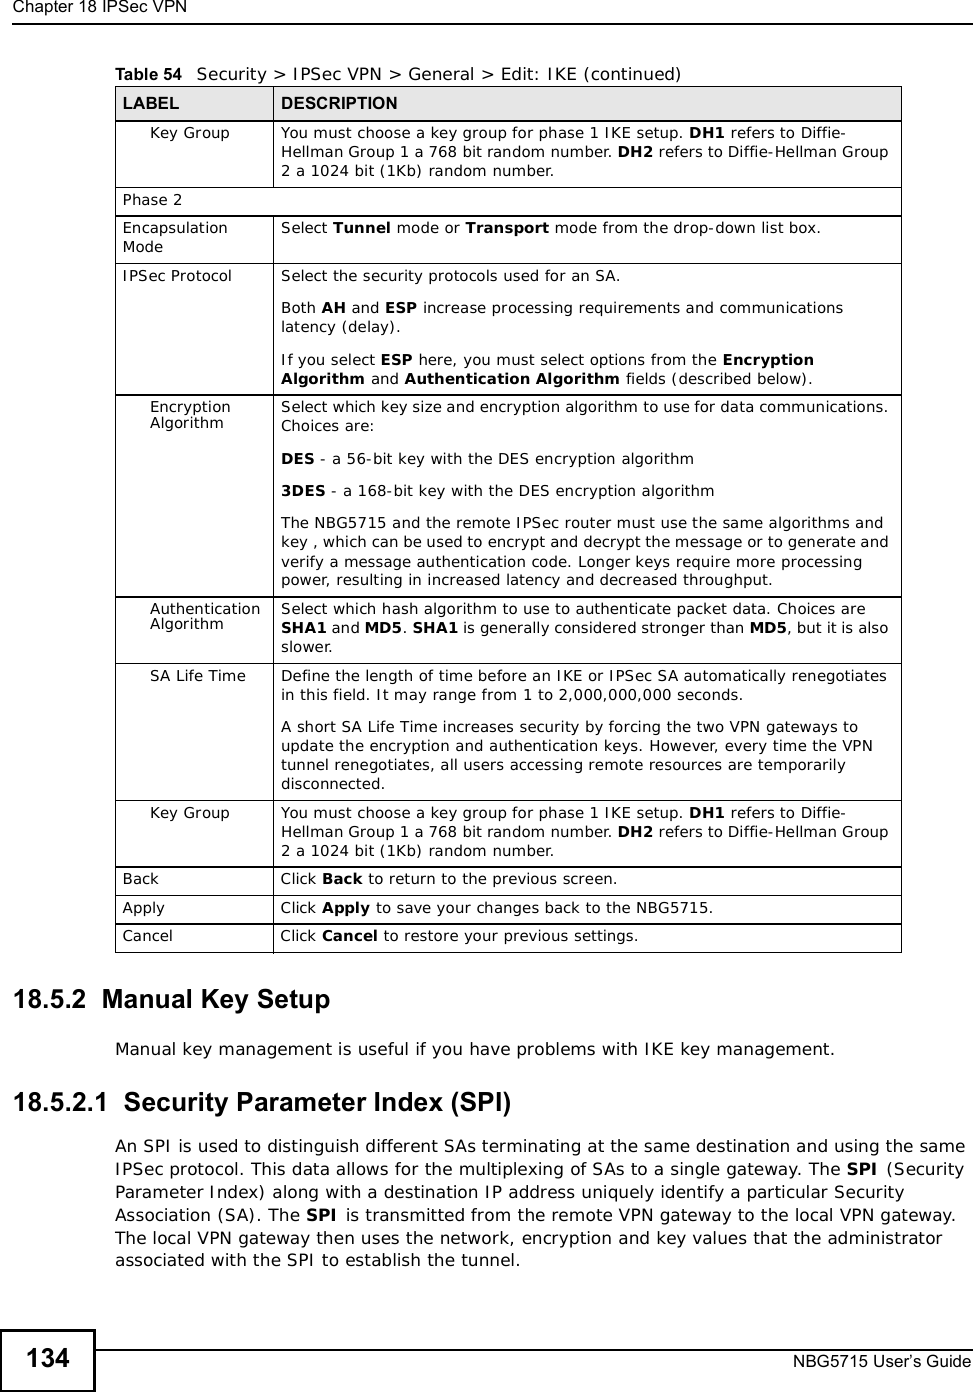 Chapter 18IPSec VPNNBG5715 User’s Guide13418.5.2  Manual Key SetupManual key management is useful if you have problems with IKE key management.18.5.2.1  Security Parameter Index (SPI) An SPI is used to distinguish different SAs terminating at the same destination and using the same IPSec protocol. This data allows for the multiplexing of SAs to a single gateway. The SPI (Security Parameter Index) along with a destination IP address uniquely identify a particular Security Association (SA). The SPI is transmitted from the remote VPN gateway to the local VPN gateway. The local VPN gateway then uses the network, encryption and key values that the administrator associated with the SPI to establish the tunnel.Key Group You must choose a key group for phase 1 IKE setup. DH1 refers to Diffie-Hellman Group 1 a 768 bit random number. DH2 refers to Diffie-Hellman Group 2 a 1024 bit (1Kb) random number. Phase 2Encapsulation Mode Select Tunnel mode or Transport mode from the drop-down list box. IPSec Protocol Select the security protocols used for an SA. Both AH and ESP increase processing requirements and communications latency (delay). If you select ESP here, you must select options from the Encryption Algorithm and Authentication Algorithm fields (described below).Encryption Algorithm Select which key size and encryption algorithm to use for data communications. Choices are:DES - a 56-bit key with the DES encryption algorithm3DES - a 168-bit key with the DES encryption algorithmThe NBG5715 and the remote IPSec router must use the same algorithms and key , which can be used to encrypt and decrypt the message or to generate and verify a message authentication code. Longer keys require more processing power, resulting in increased latency and decreased throughput.Authentication Algorithm Select which hash algorithm to use to authenticate packet data. Choices are SHA1 and MD5.SHA1 is generally considered stronger than MD5, but it is also slower.SA Life Time Define the length of time before an IKE or IPSec SA automatically renegotiates in this field. It may range from 1 to 2,000,000,000 seconds.A short SA Life Time increases security by forcing the two VPN gateways to update the encryption and authentication keys. However, every time the VPN tunnel renegotiates, all users accessing remote resources are temporarily disconnected. Key Group You must choose a key group for phase 1 IKE setup. DH1 refers to Diffie-Hellman Group 1 a 768 bit random number. DH2 refers to Diffie-Hellman Group 2 a 1024 bit (1Kb) random number. BackClick Back to return to the previous screen.ApplyClick Apply to save your changes back to the NBG5715.CancelClick Cancel to restore your previous settings.Table 54   Security &gt; IPSec VPN &gt; General &gt; Edit: IKE (continued)LABEL DESCRIPTION